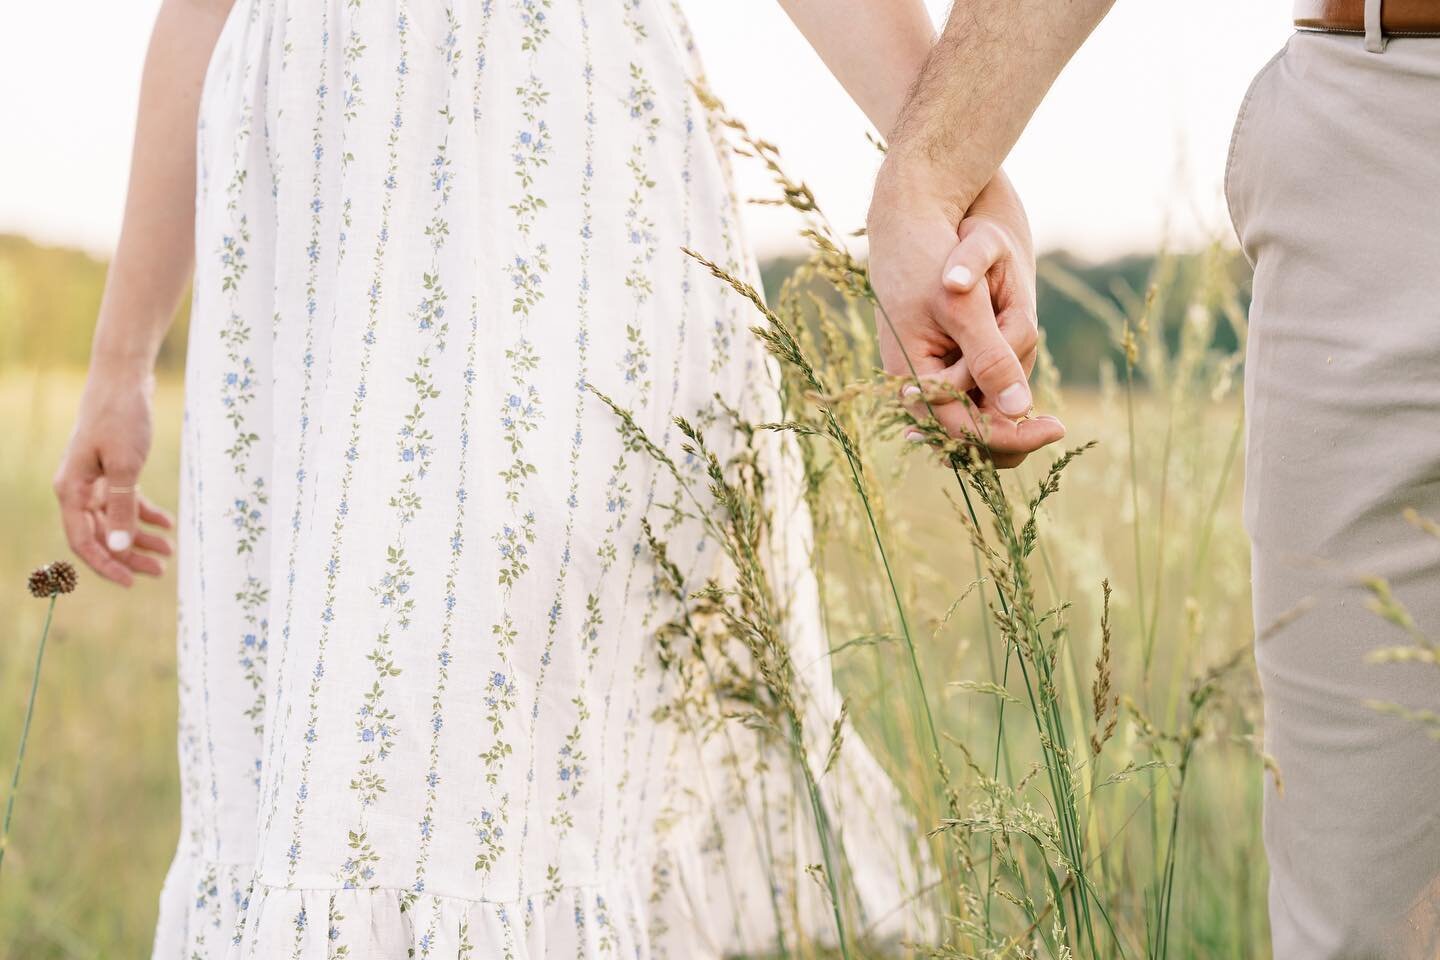 My thoughts are, a gallery is complete when you have images of you, of your environment, and of the details. hands intertwining, golden sun on delicate grass. It those photos that complete the feeling of the moment.